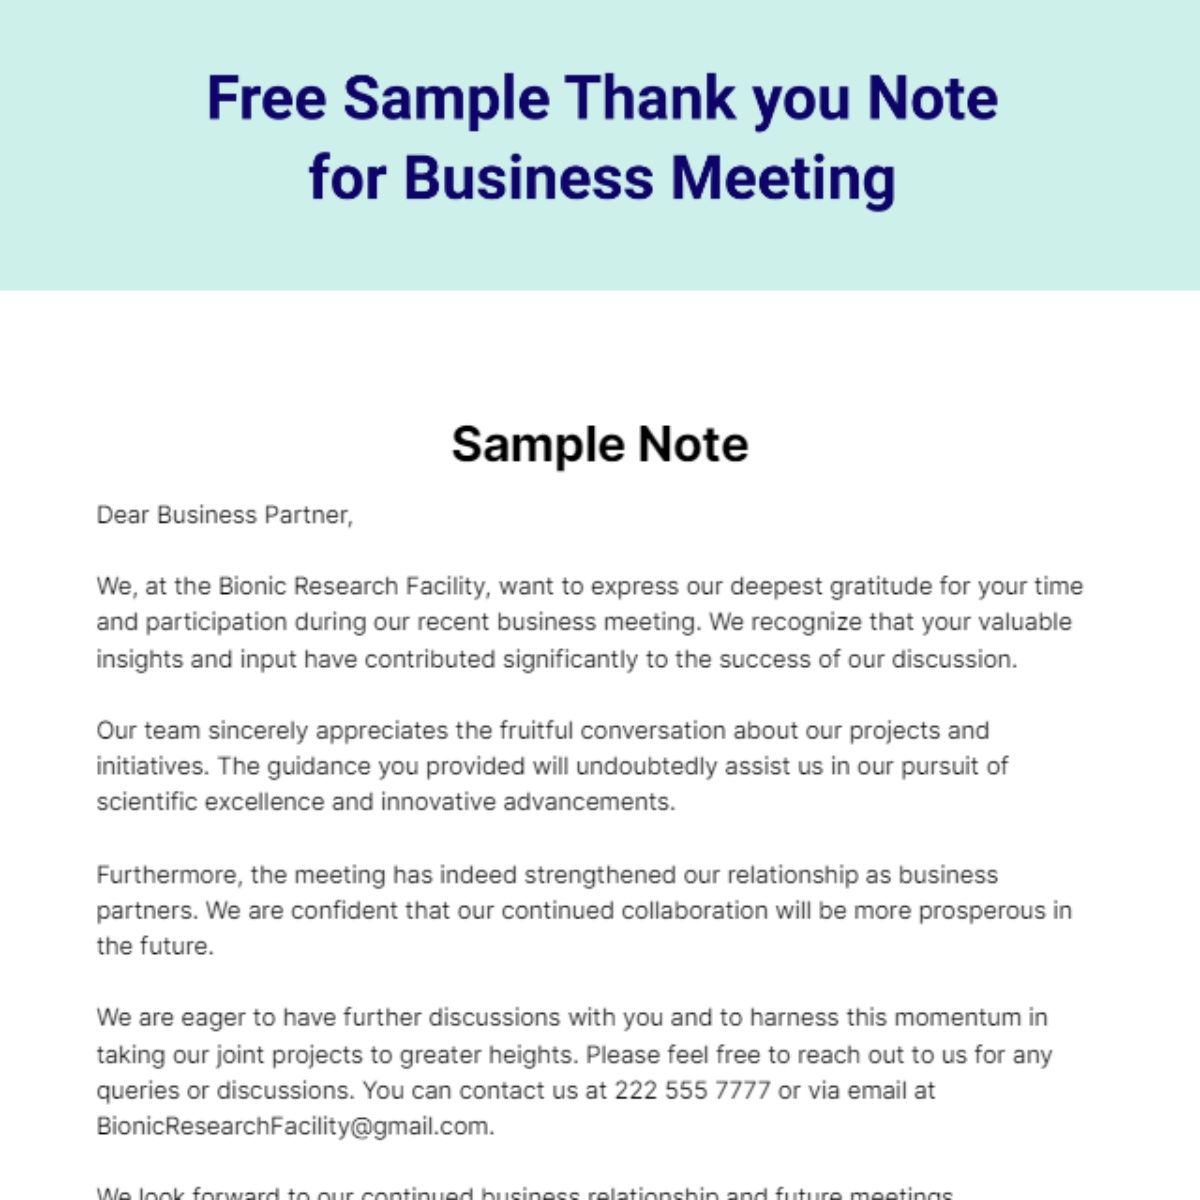 Free Sample Thank you Note for Business Meeting Template